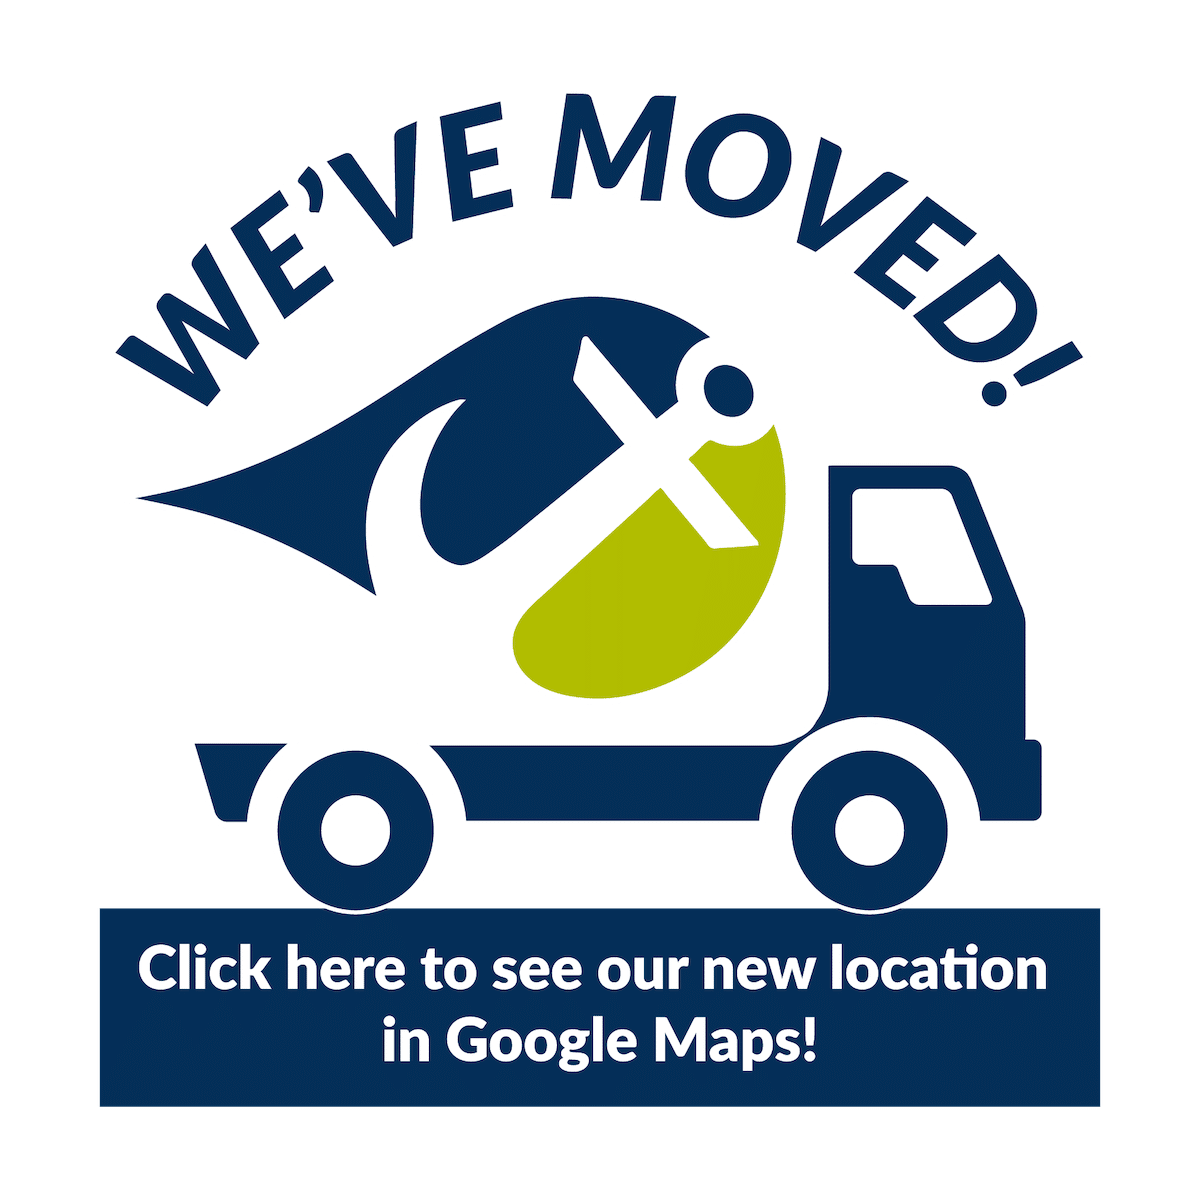 We've Moved! Click here to see our new location in Google Maps!